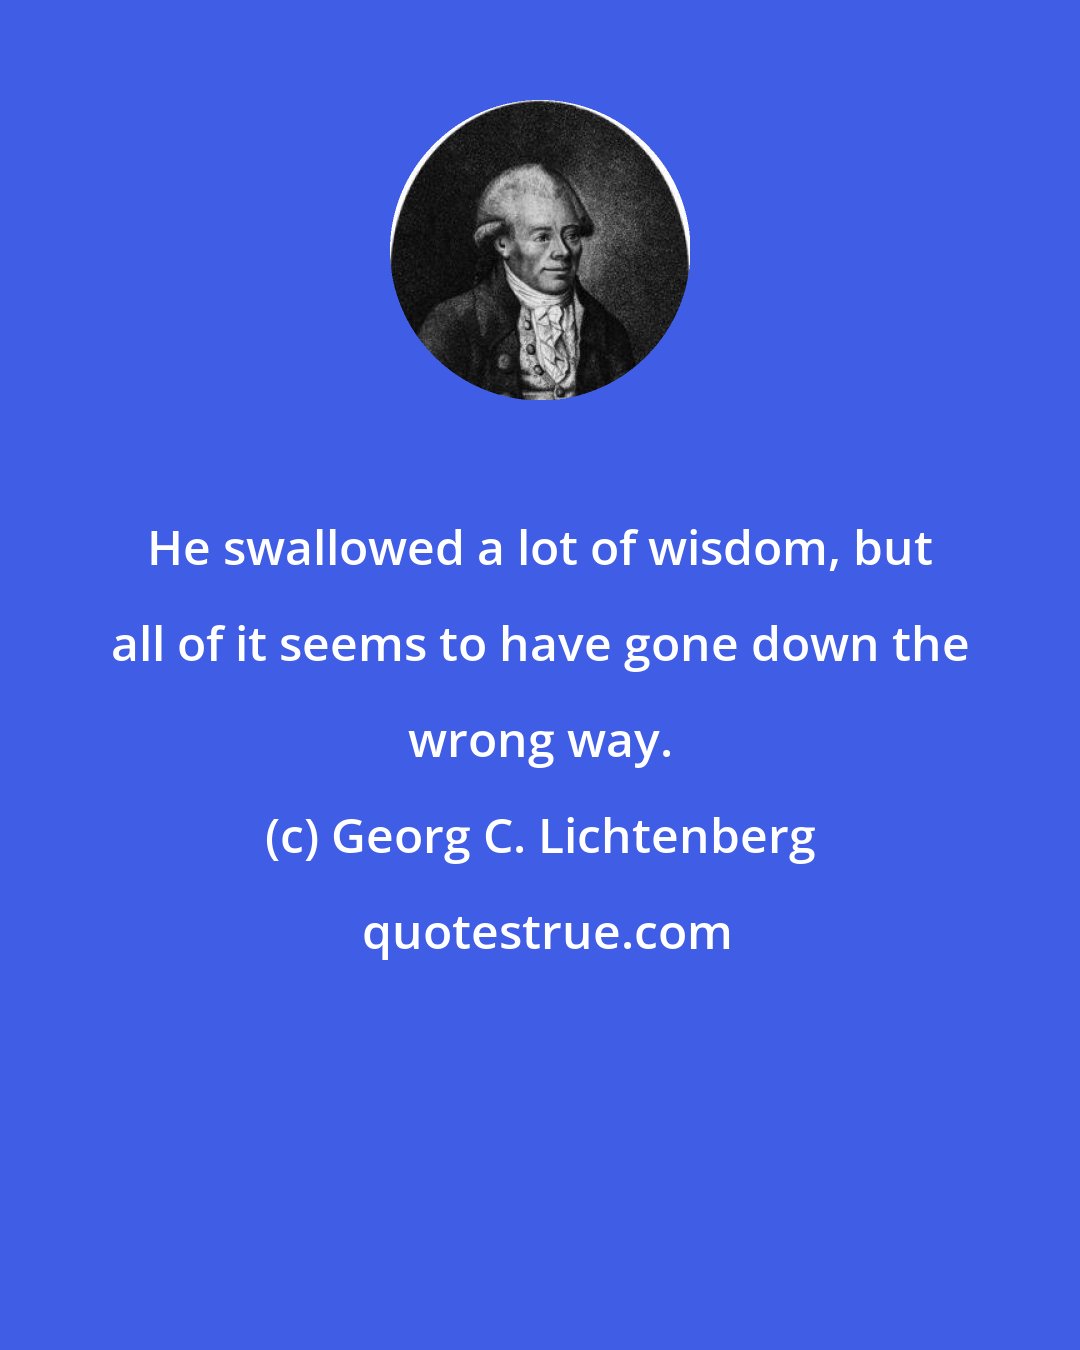 Georg C. Lichtenberg: He swallowed a lot of wisdom, but all of it seems to have gone down the wrong way.